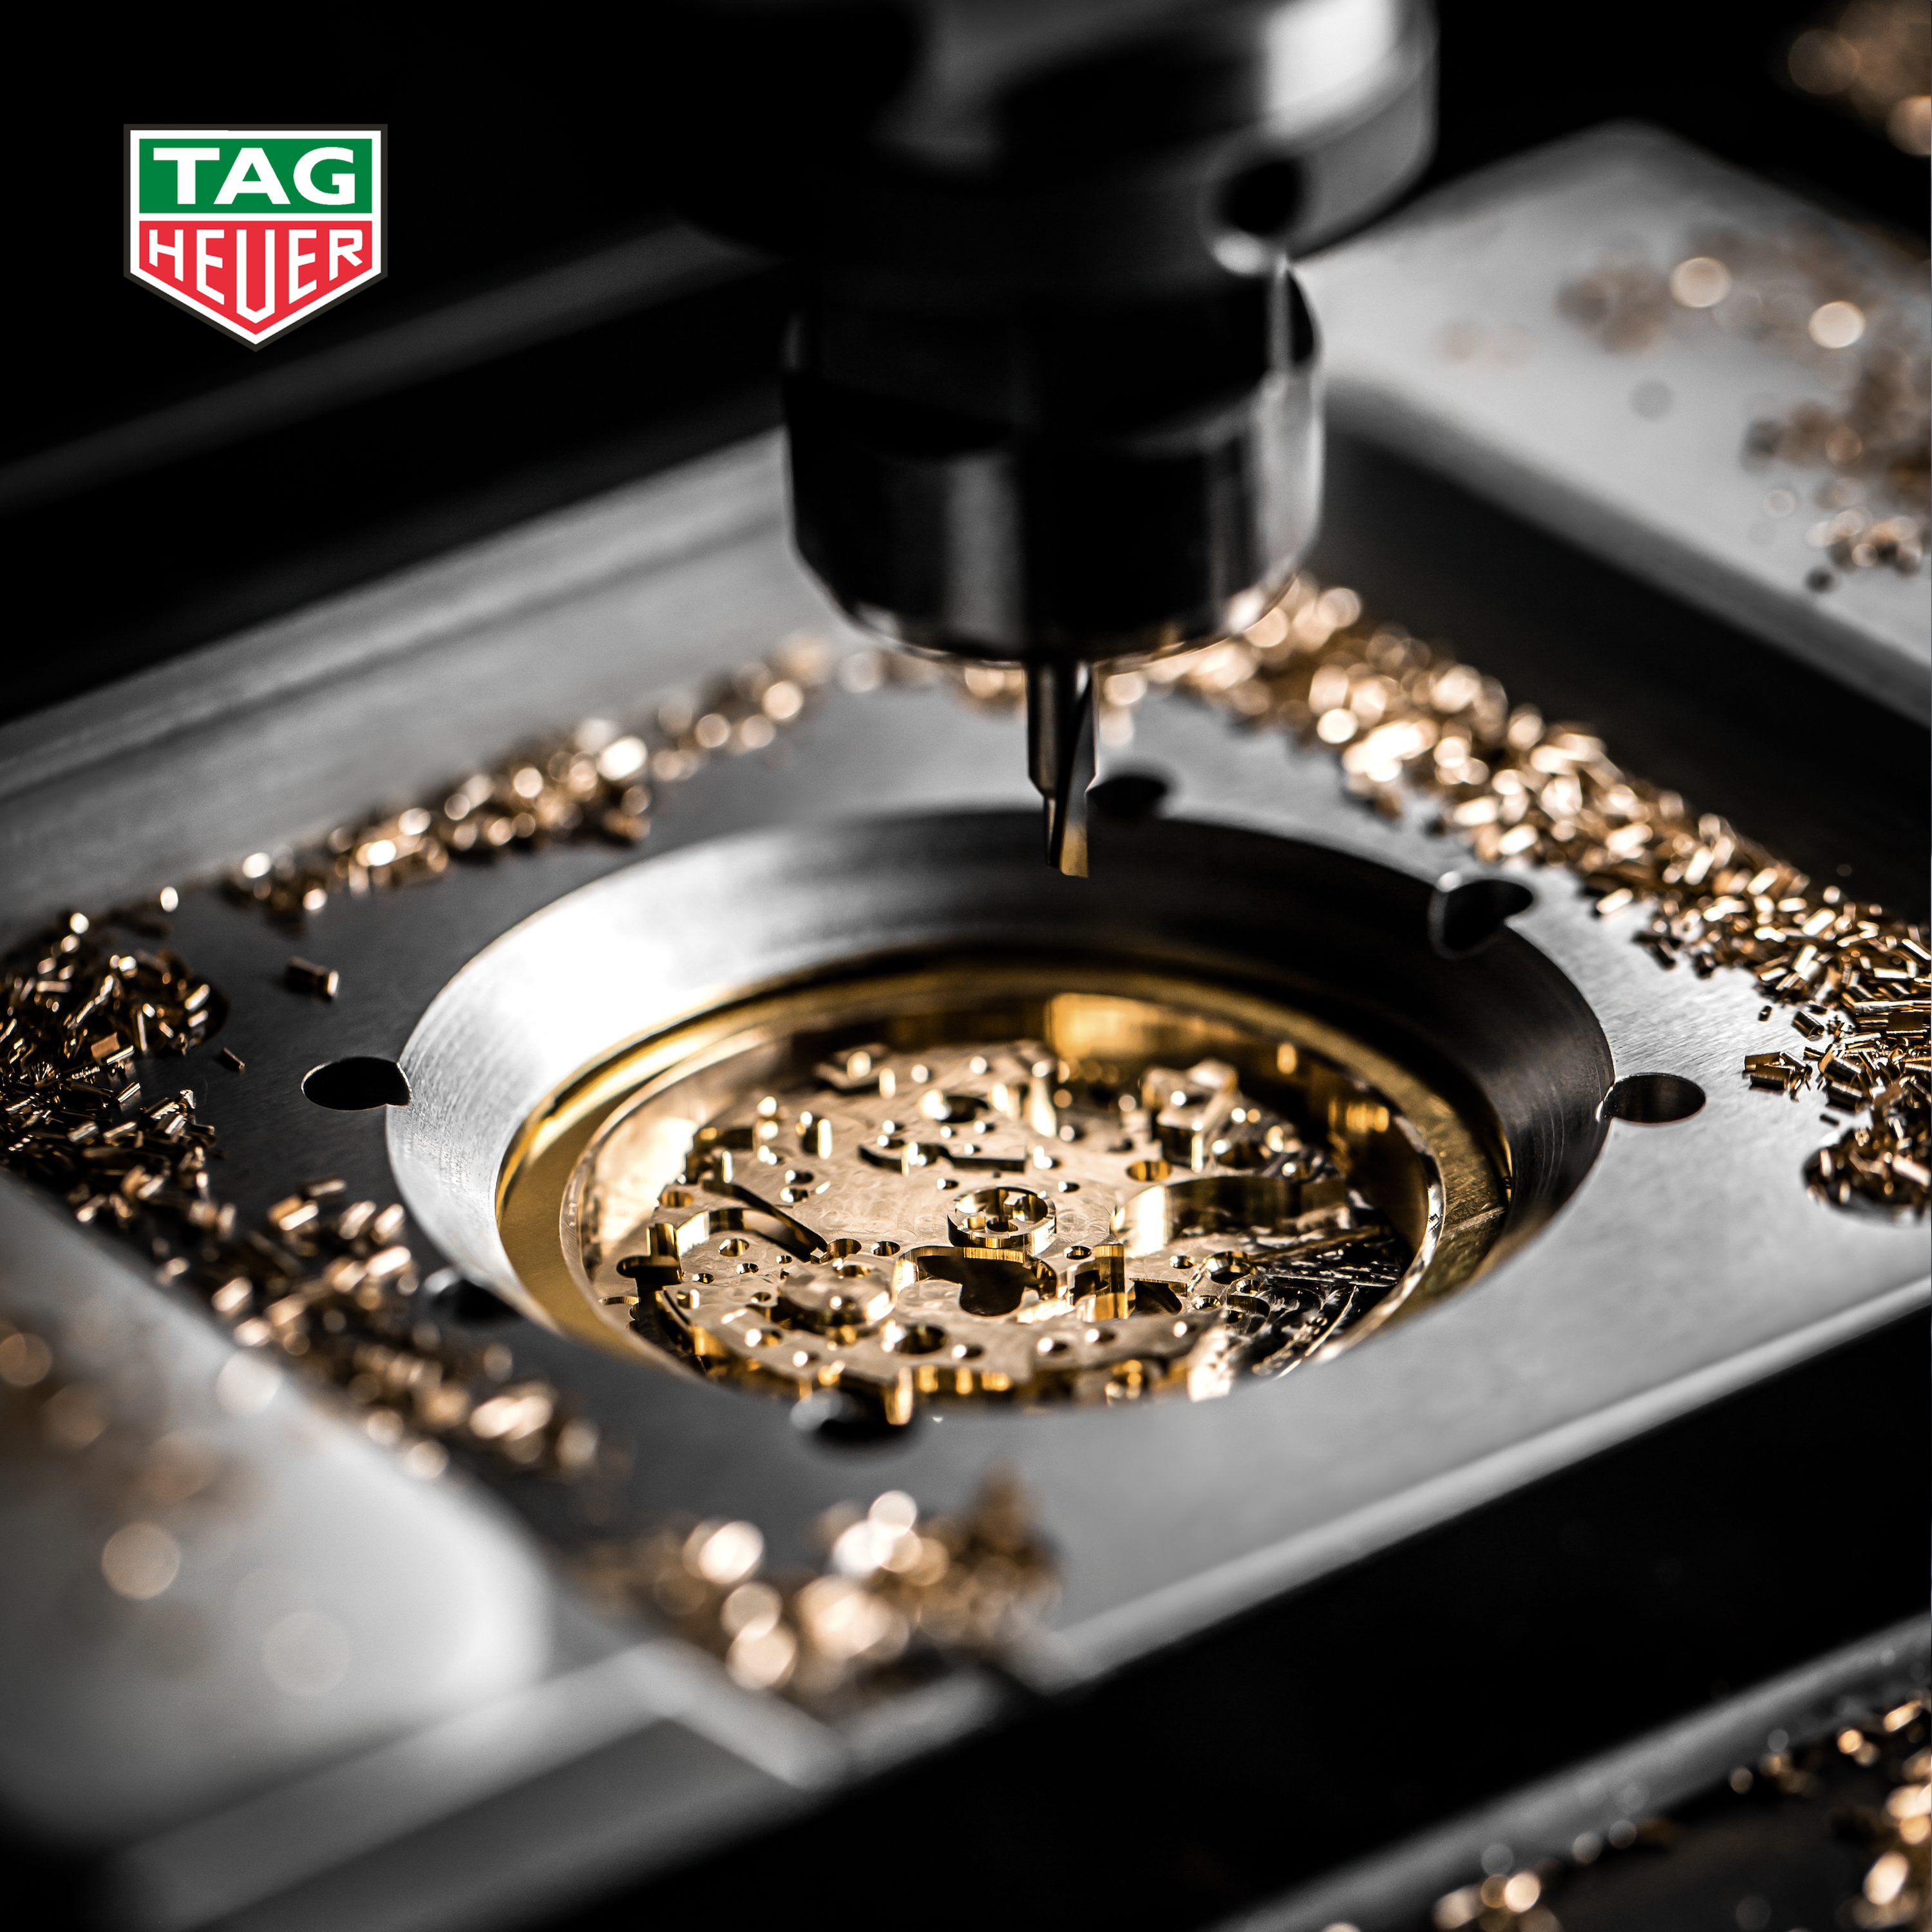 Part 2 - The making of a TAG Heuer movement